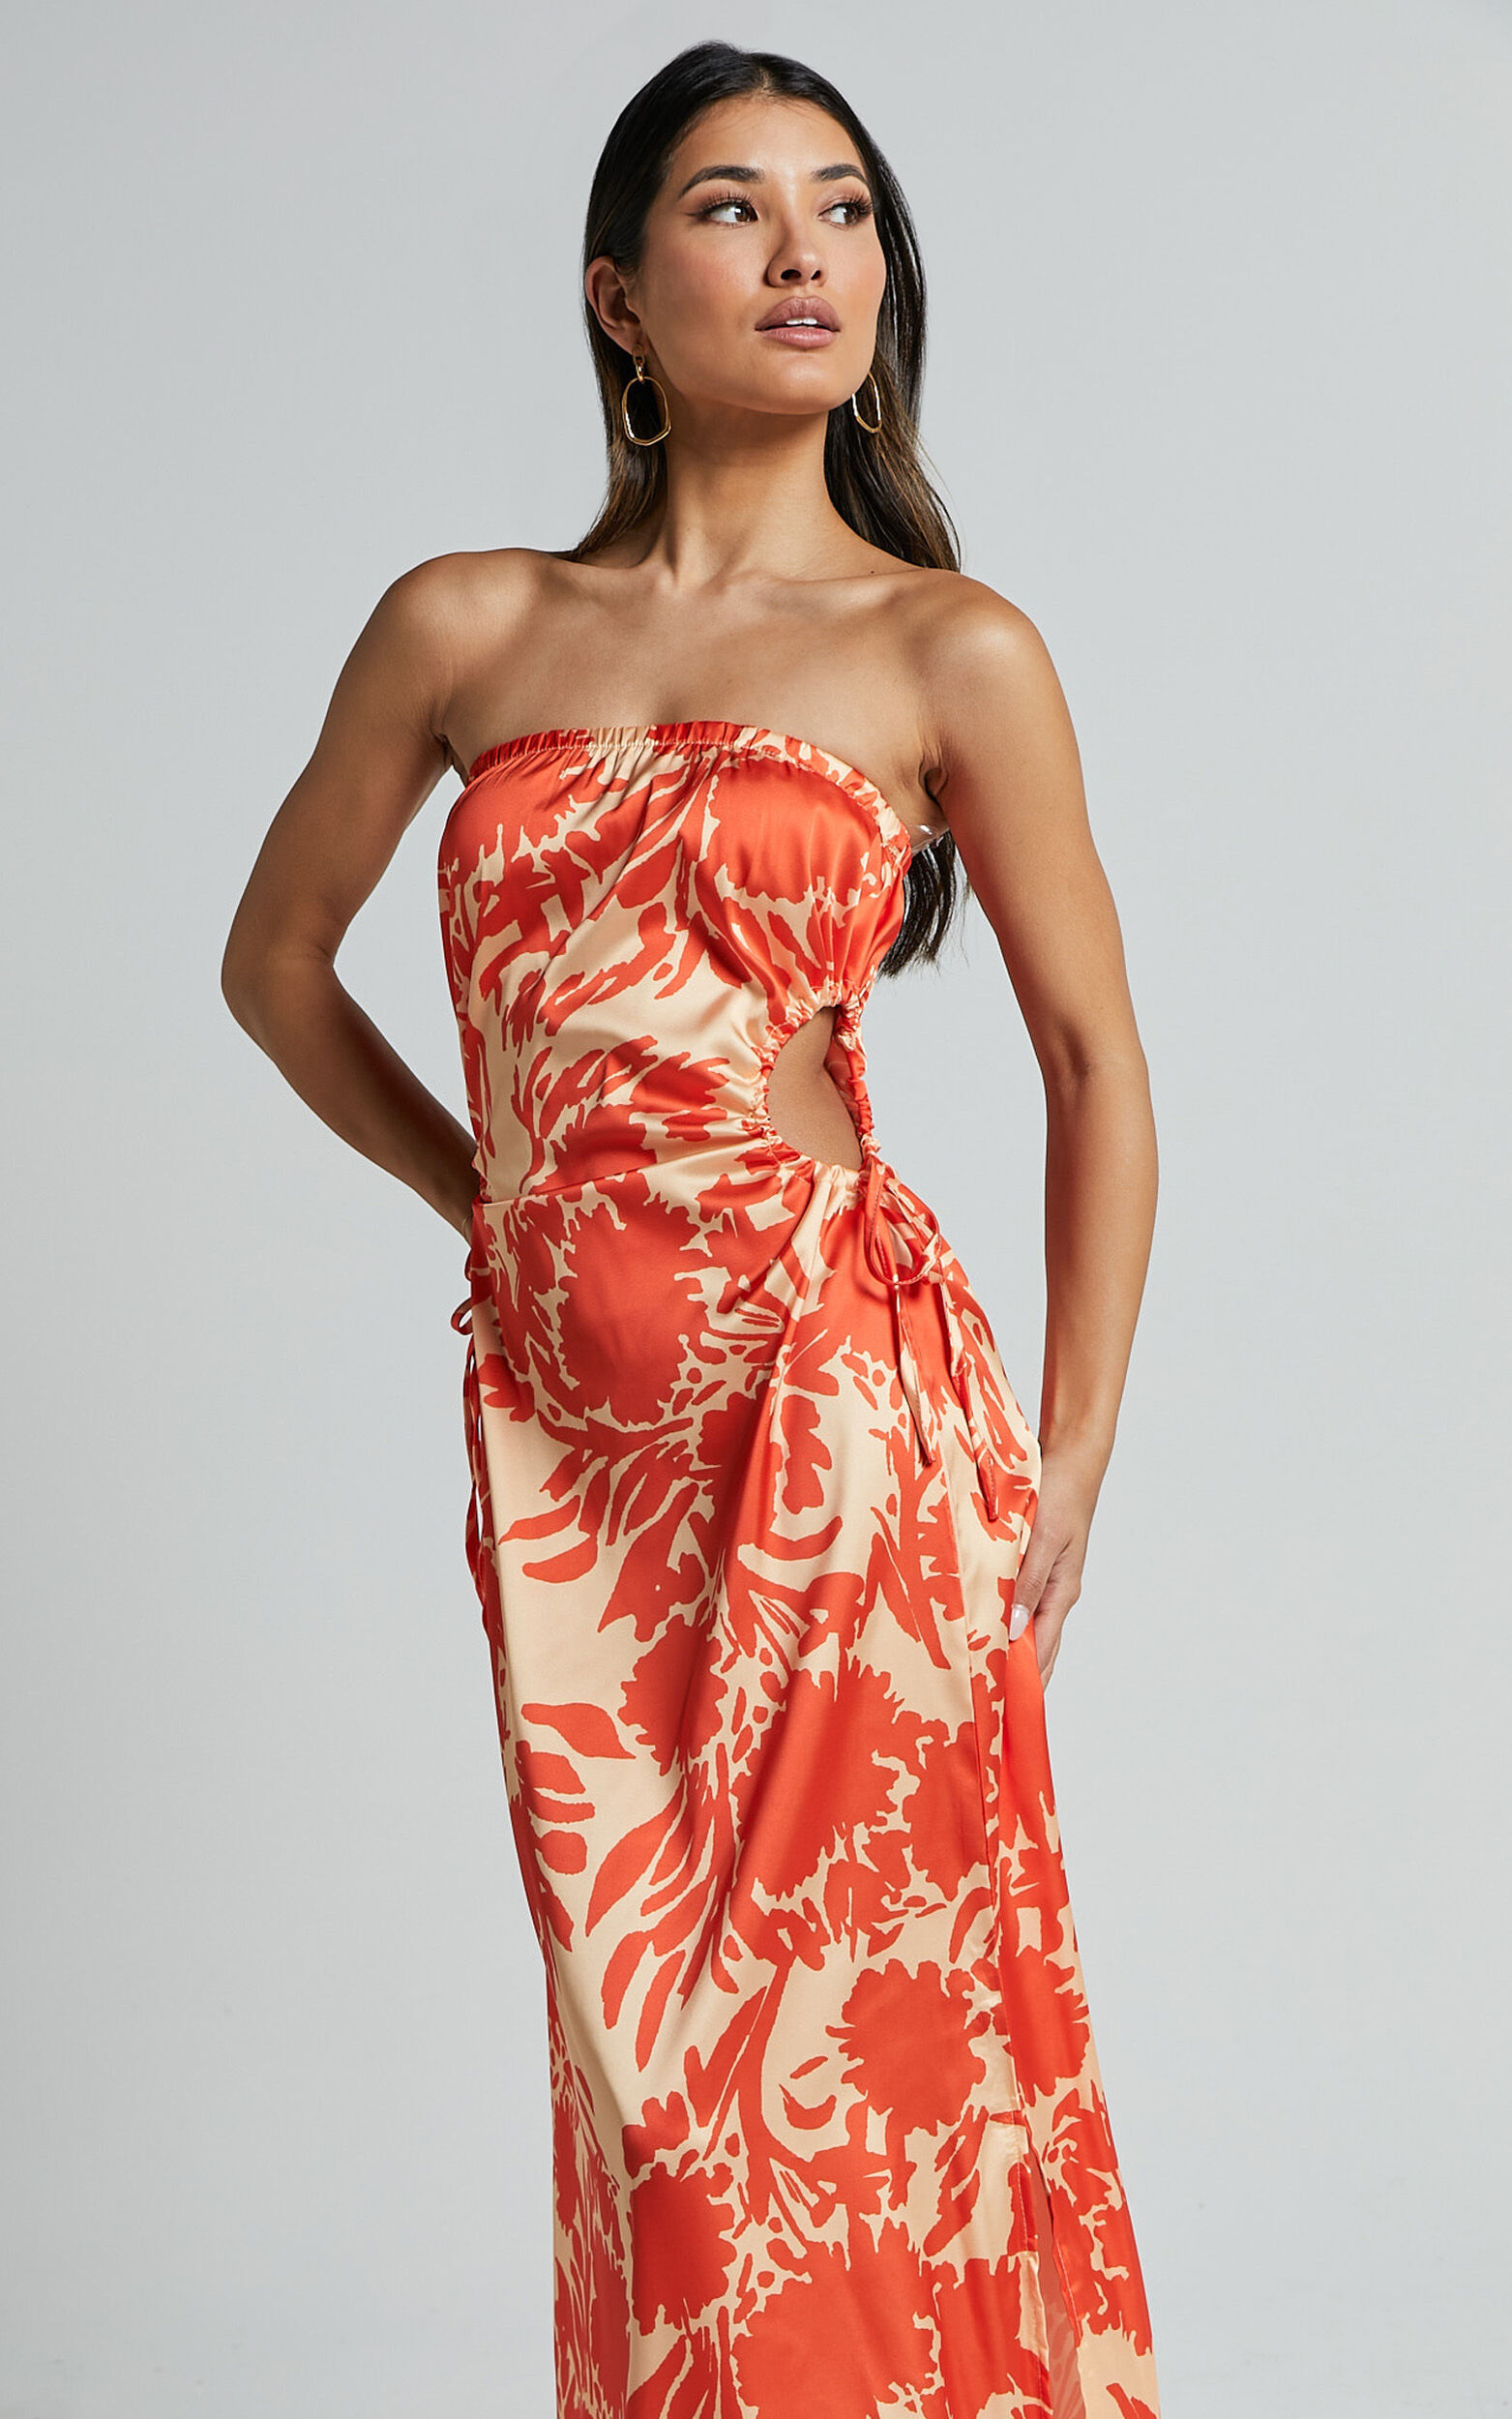 Veronica Midi Dress - Strapless Side Cut Out Satin Dress in Orange Floral - 06, ORG1